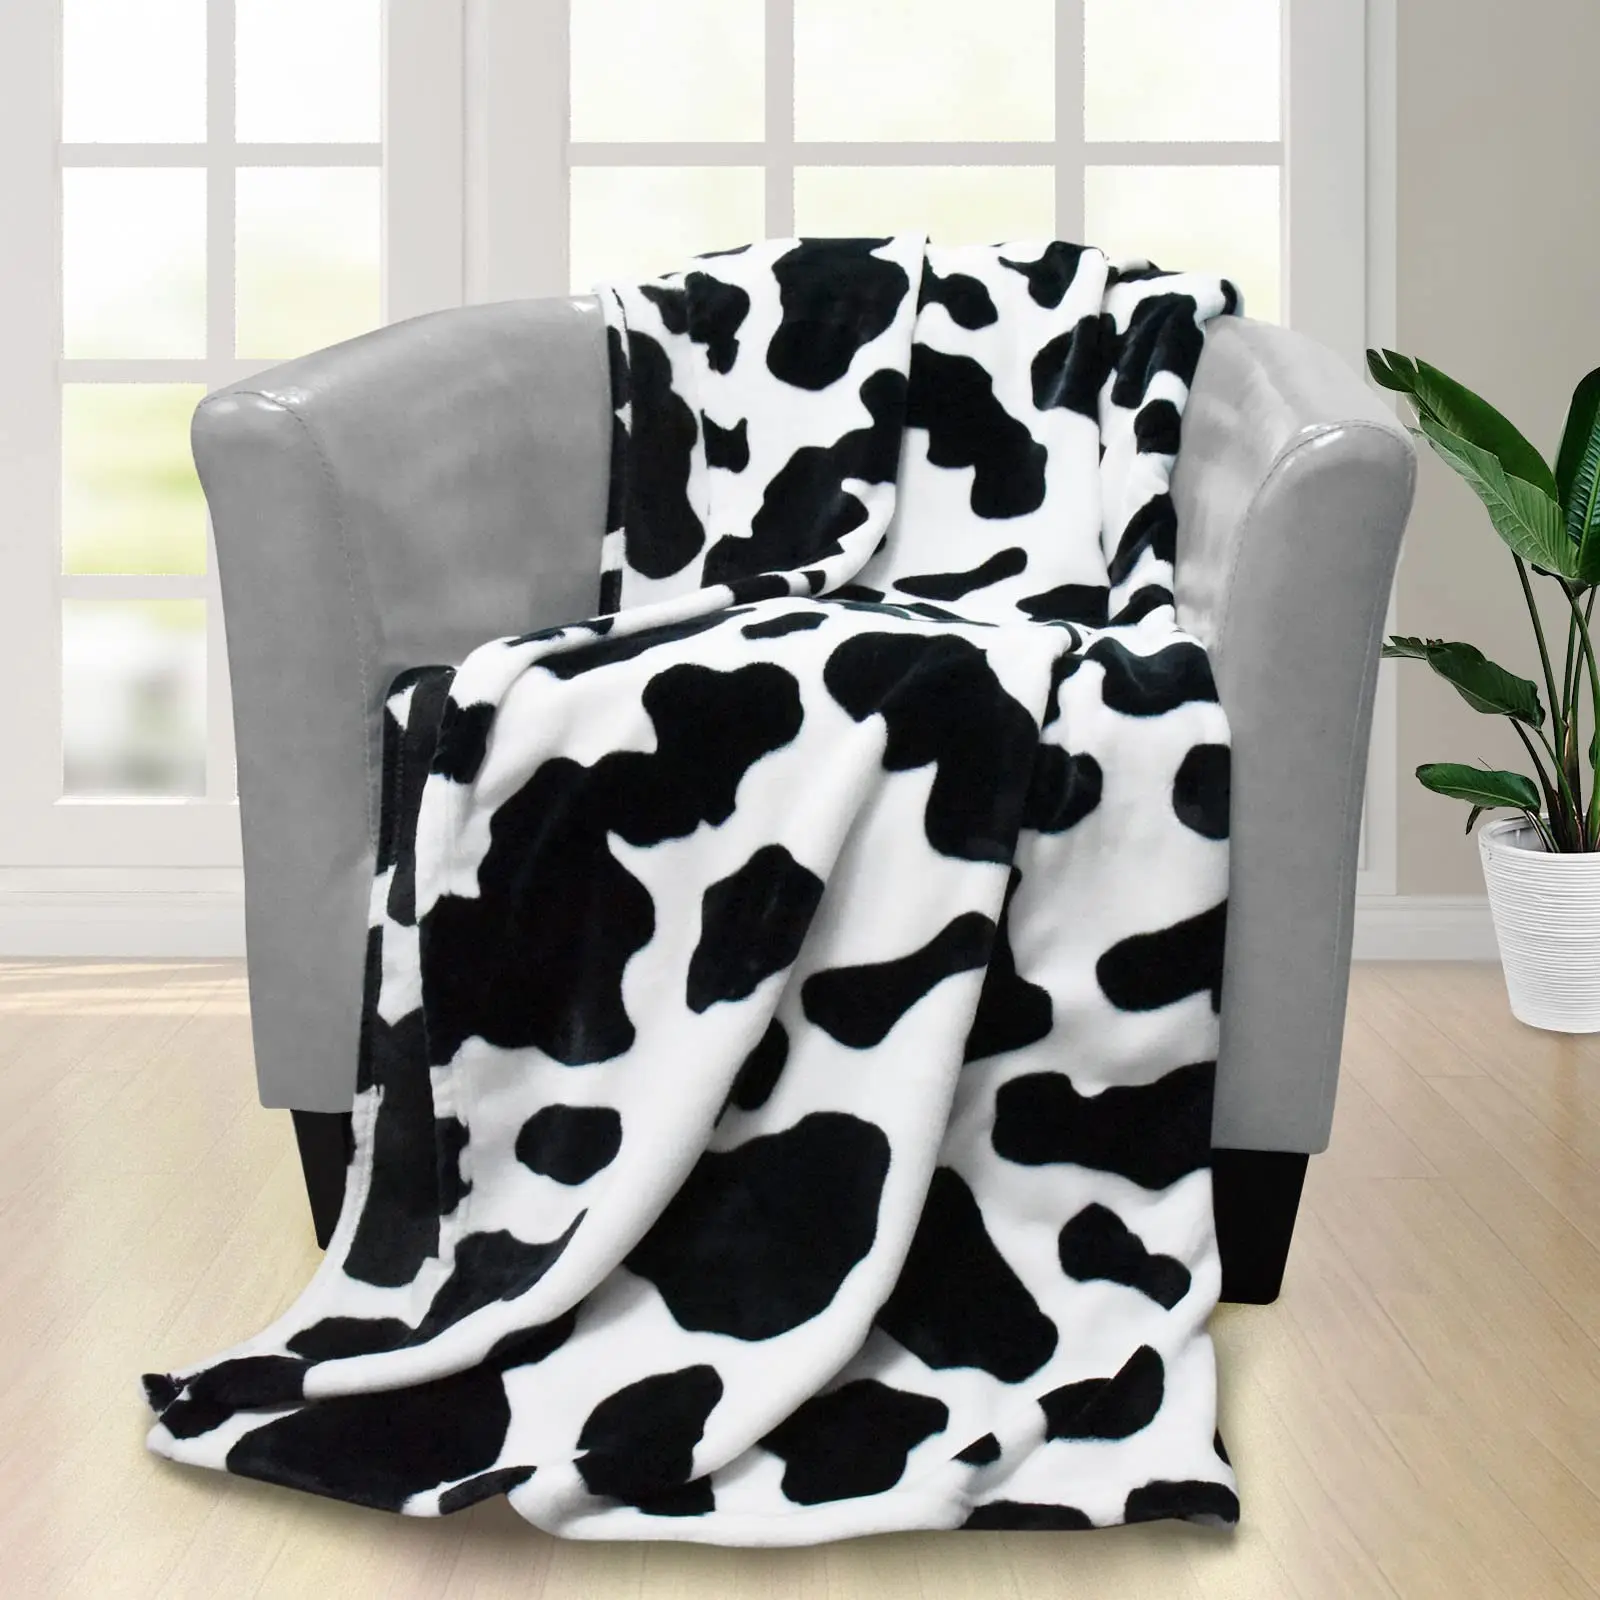 

Cow Print Blanket Black White Bed Cow Throws Soft Couch Sofa Cozy Warm Small Blankets Plush Gift for Daughter Mom, Bedroom Decor